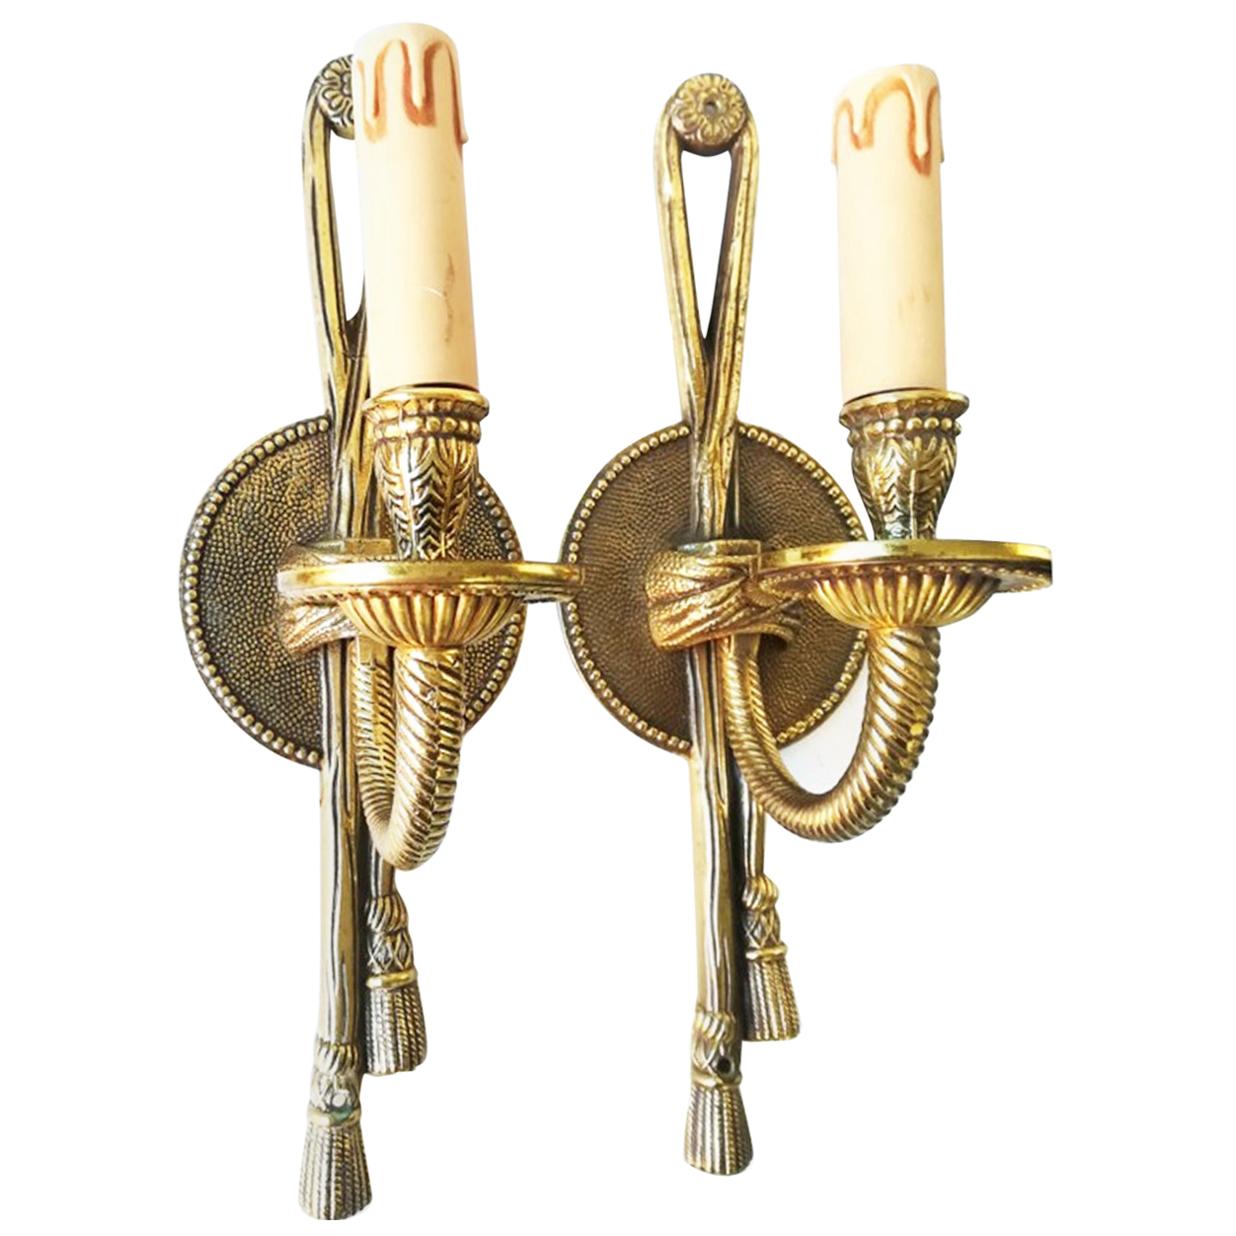 Pair of one arm wall sconces bronze doré or brass, Louis XVI style of the first half of the 20th century.

This model of French wall lamps or sconces have illuminated the Grand Hotels and Cafes with French-style decoration in Europe and around the